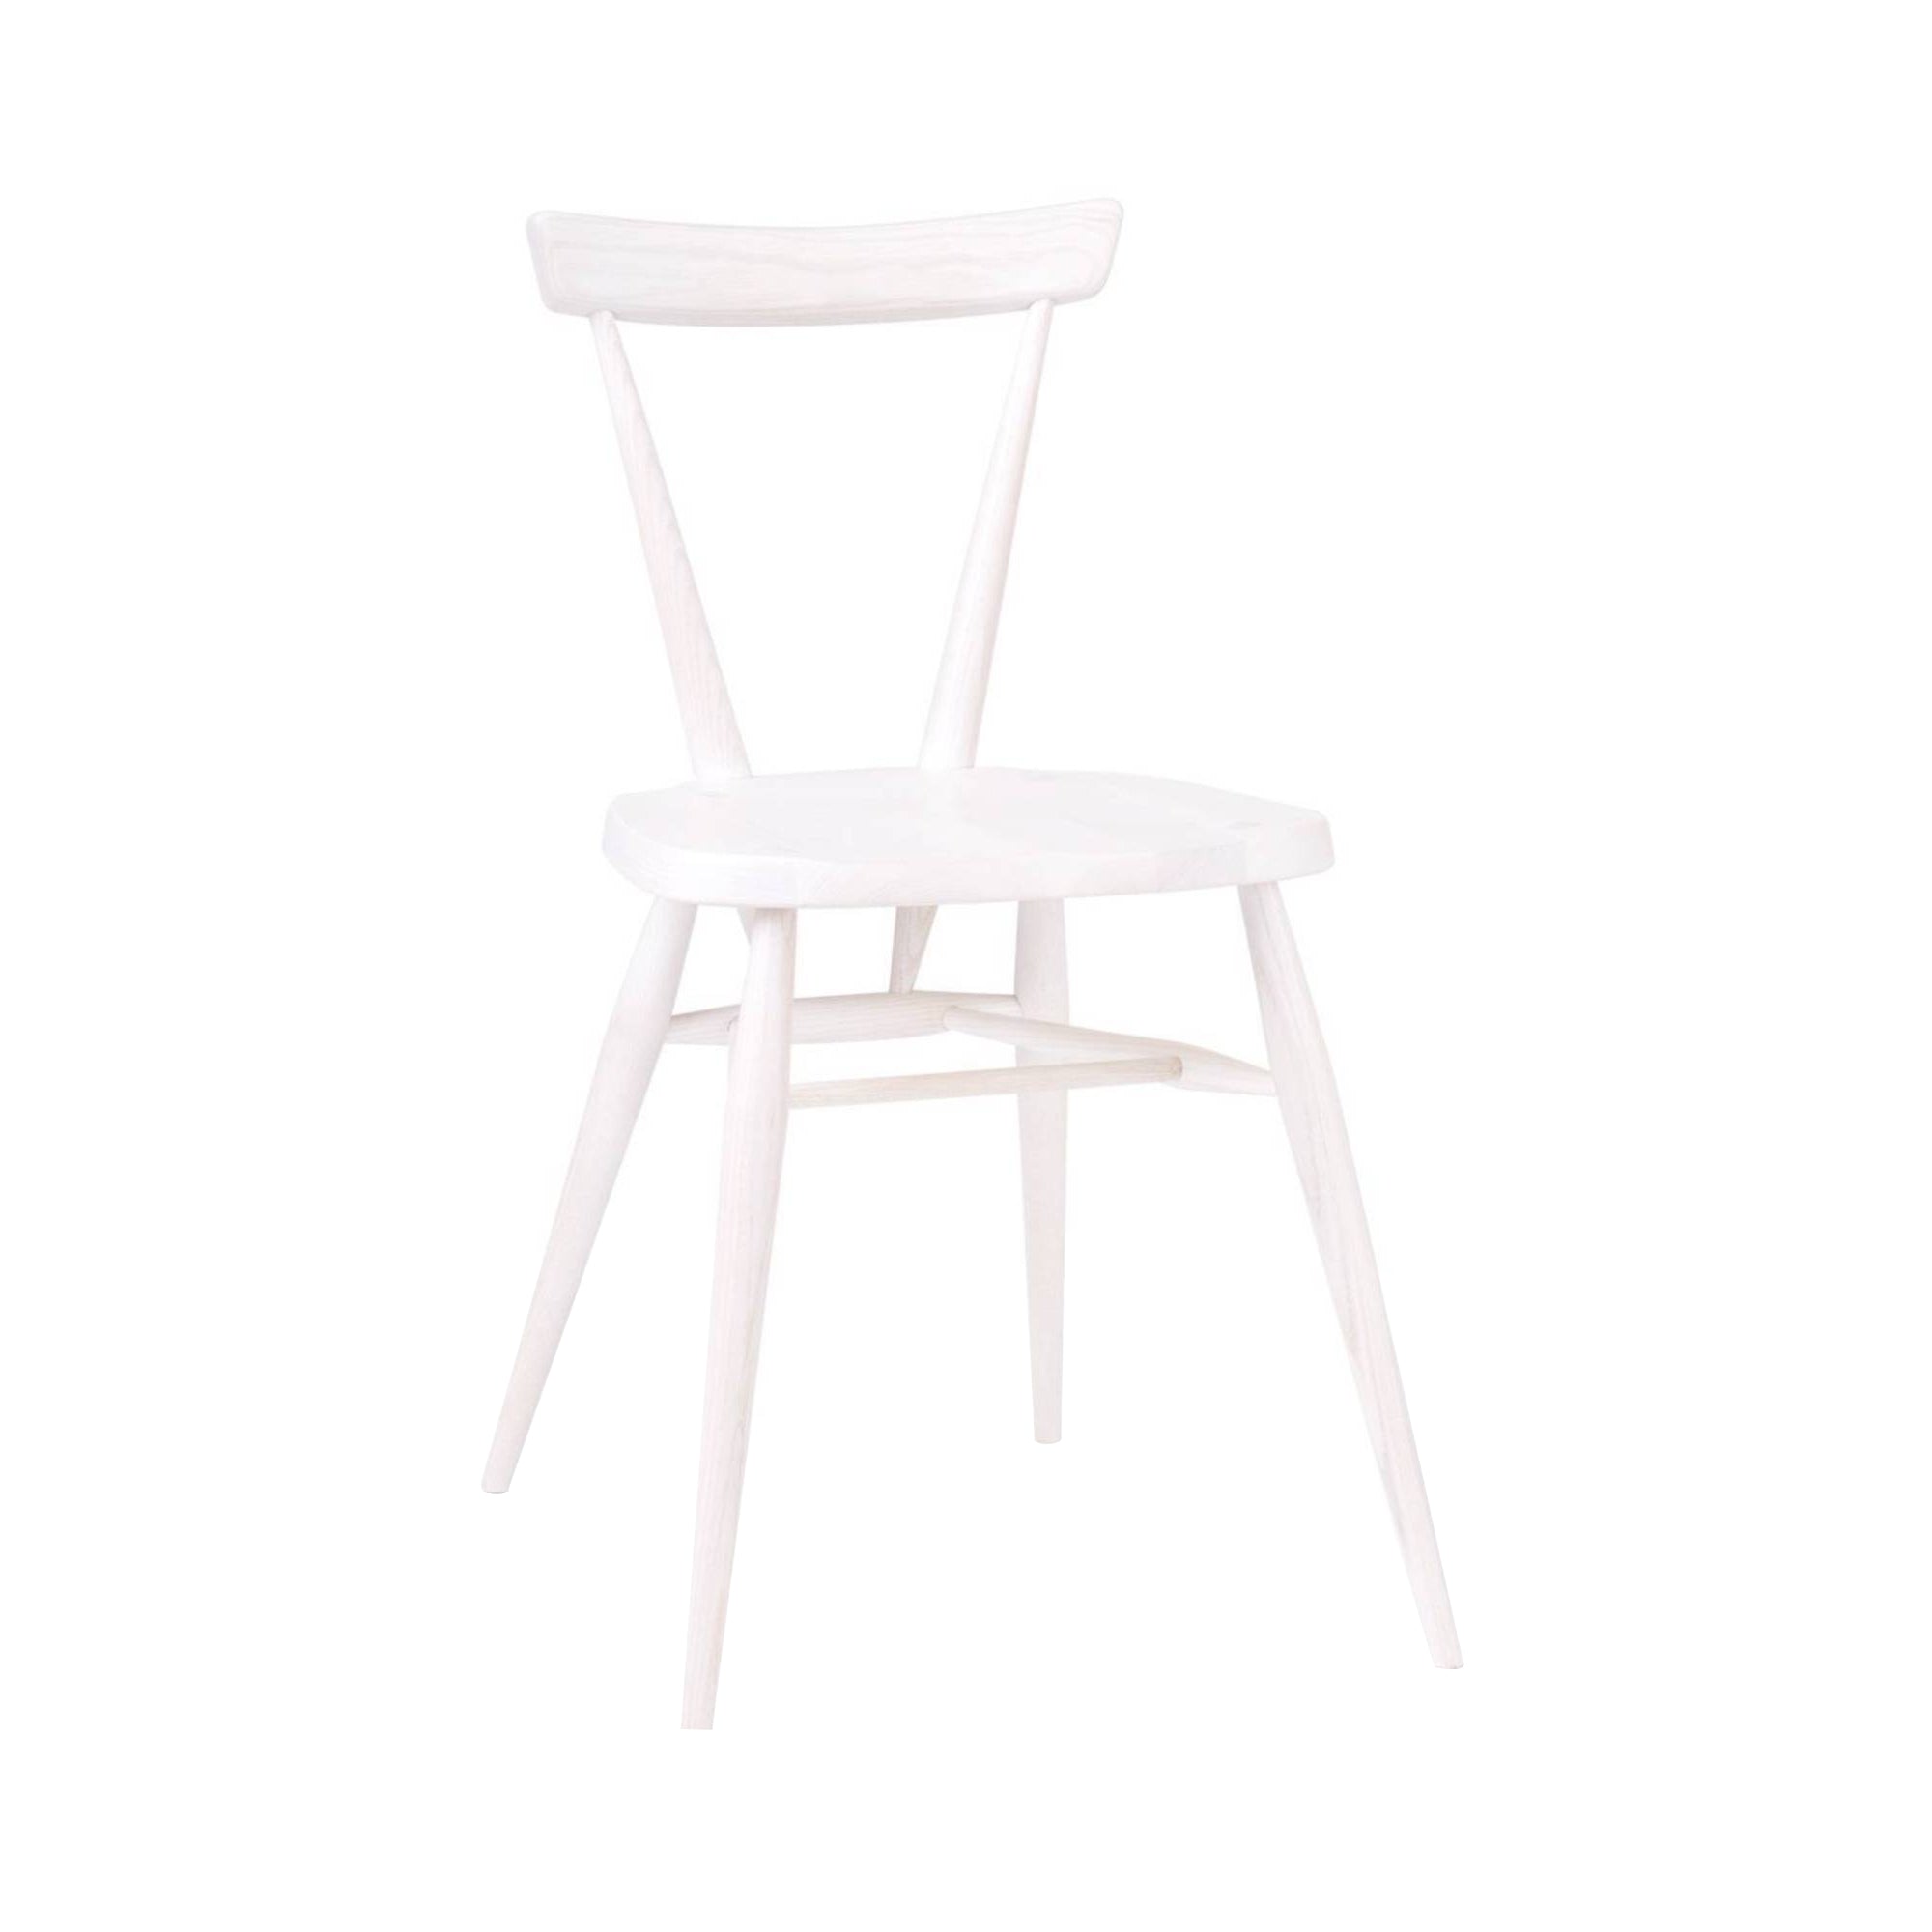 Originals Stacking Chair: Off White